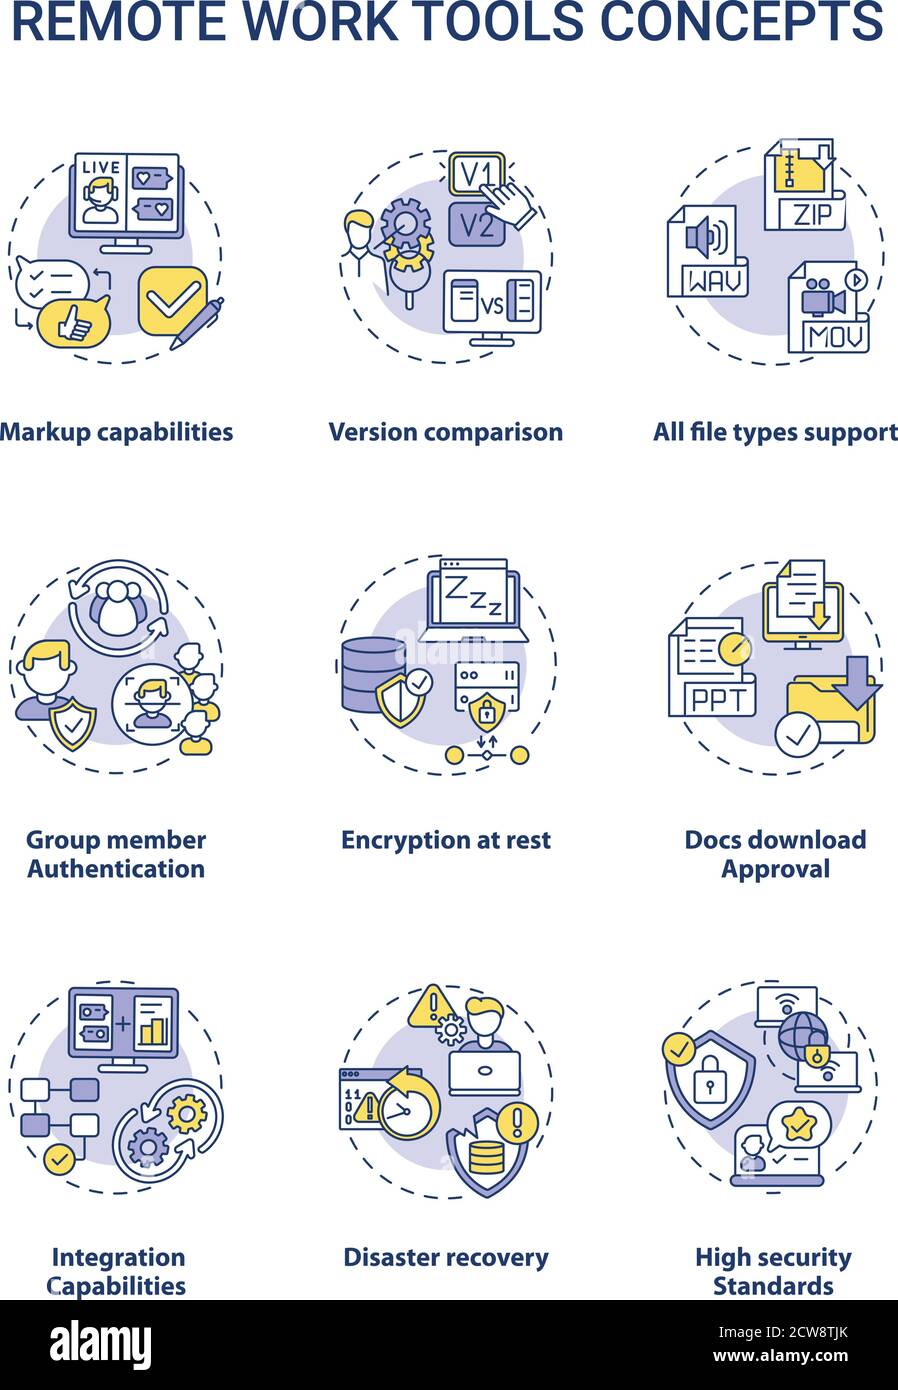 Remote work tools concept icons set Stock Vector